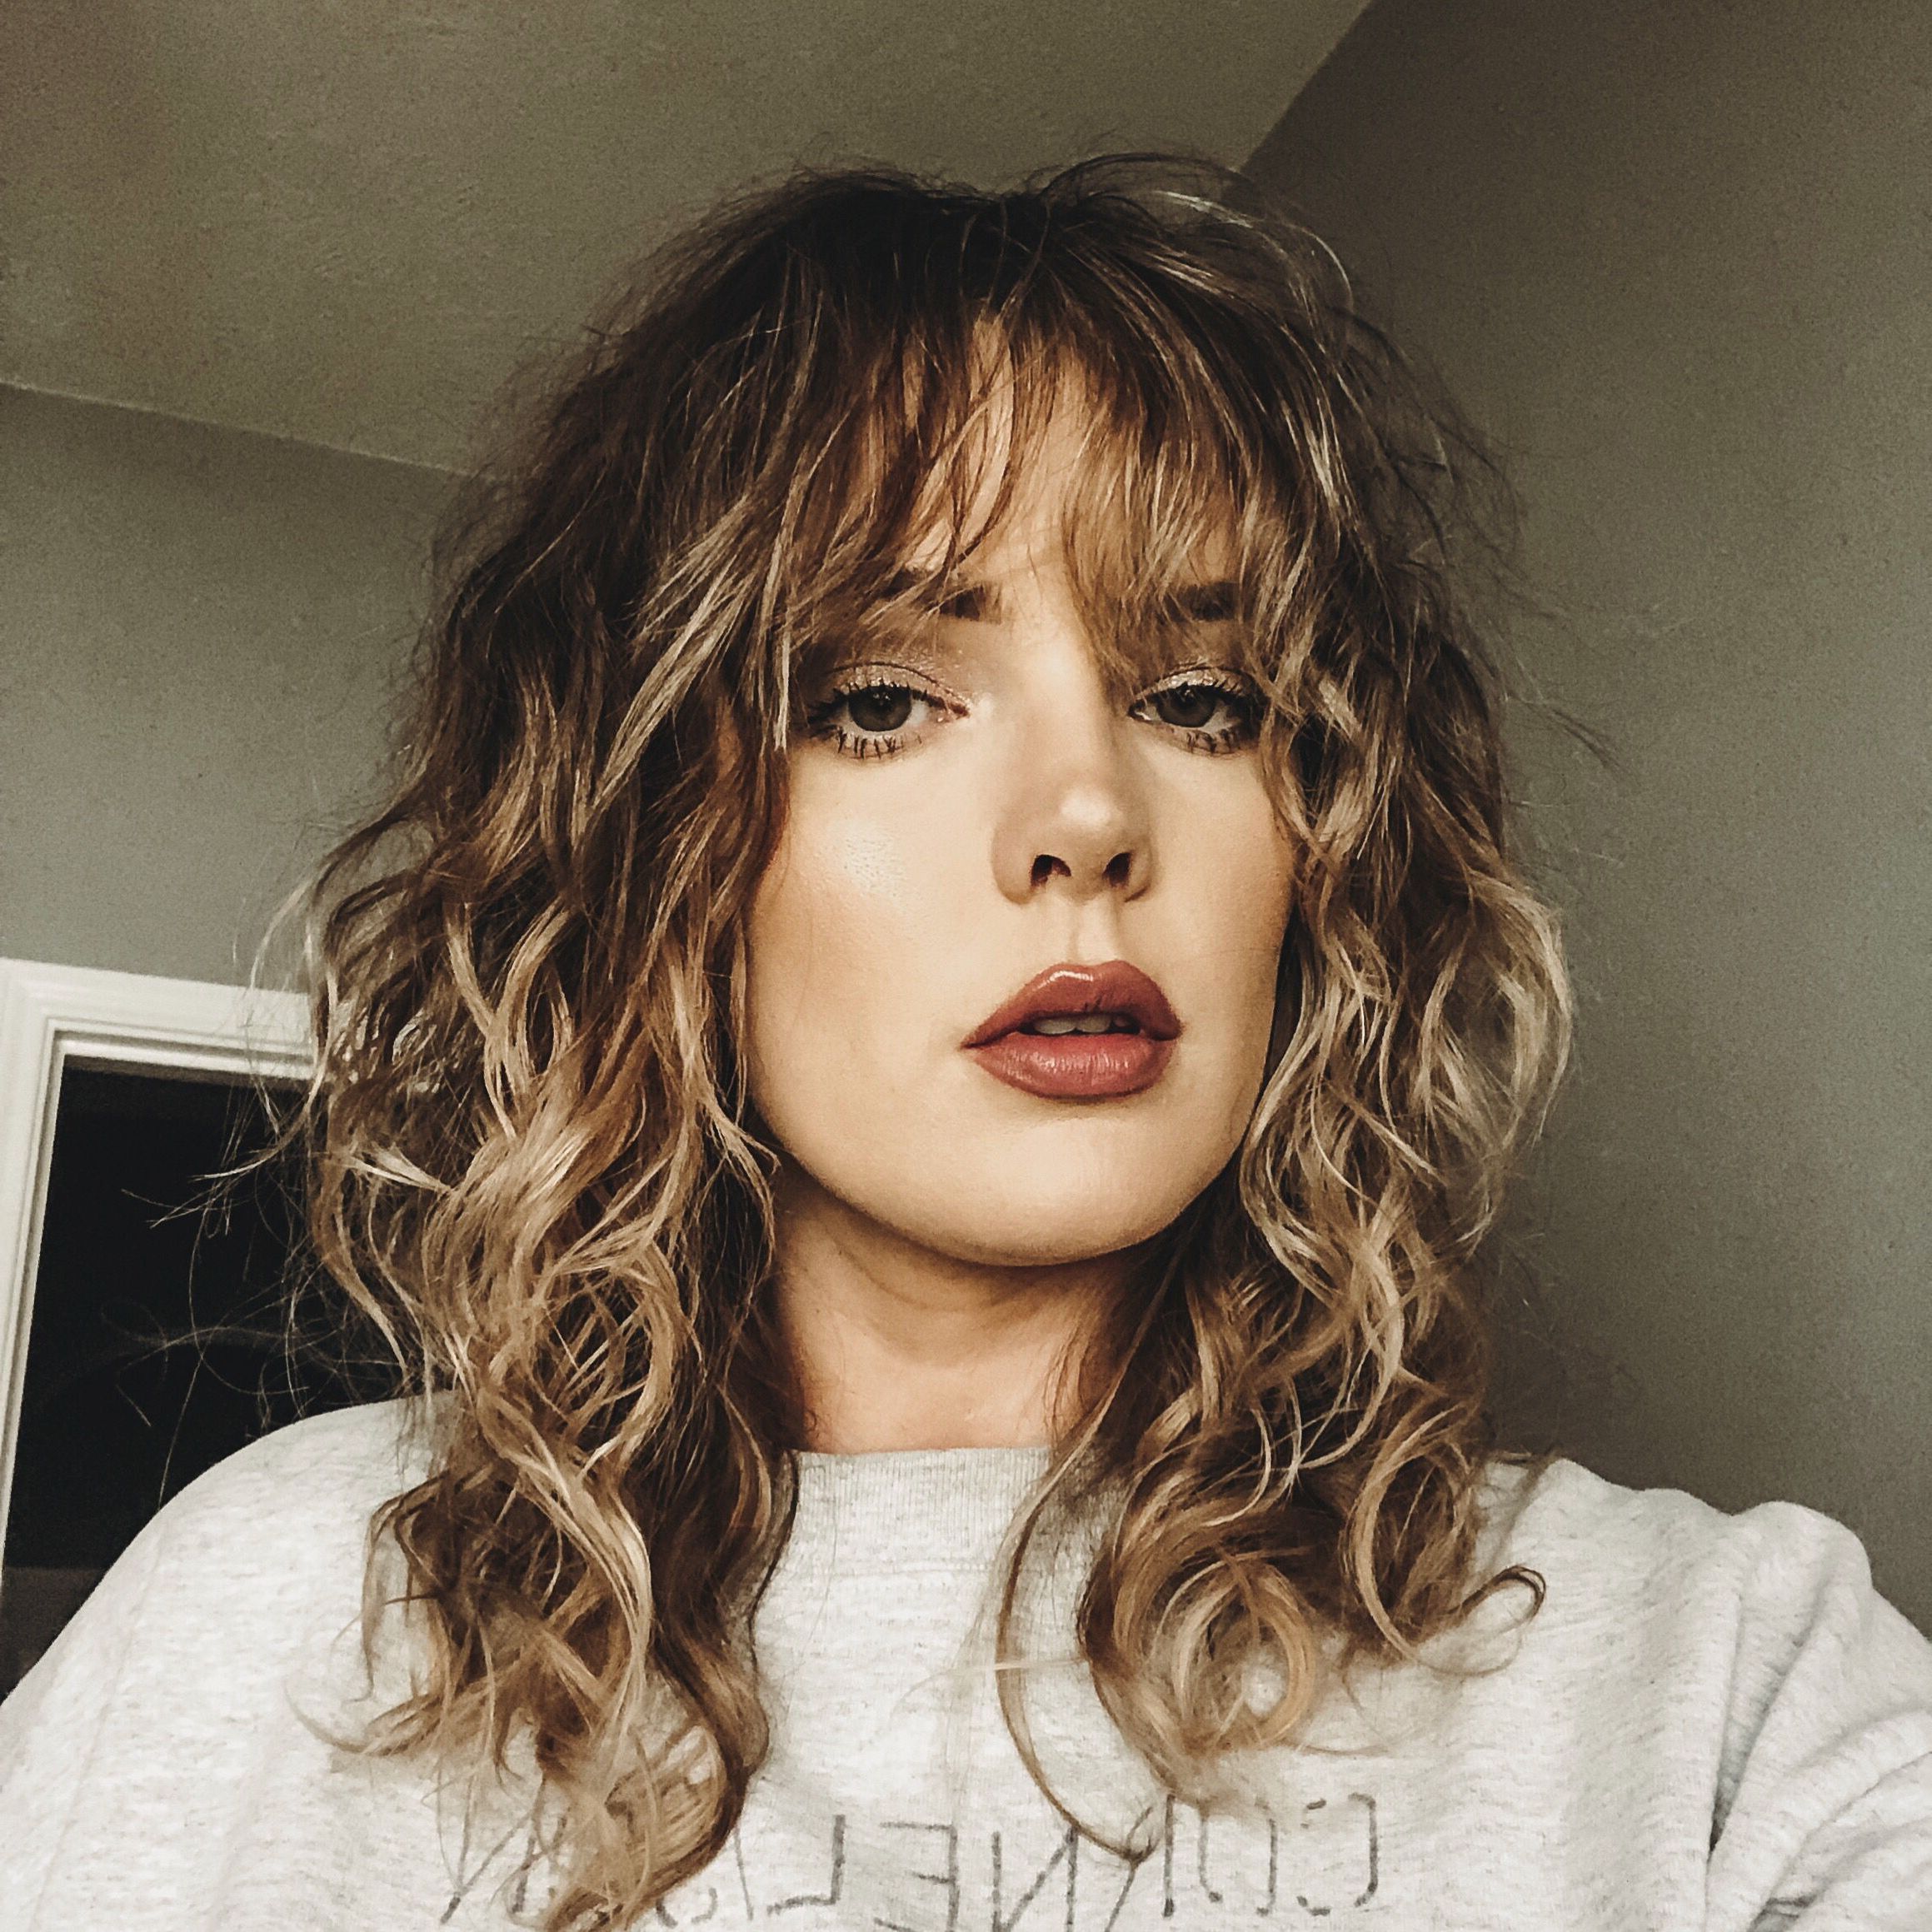 Curly Bangs | Curly Hair With Bangs, Long Hair Styles, Haircuts For Curly  Hair Pertaining To Most Popular Slightly Curly Hair With Bangs (View 13 of 18)